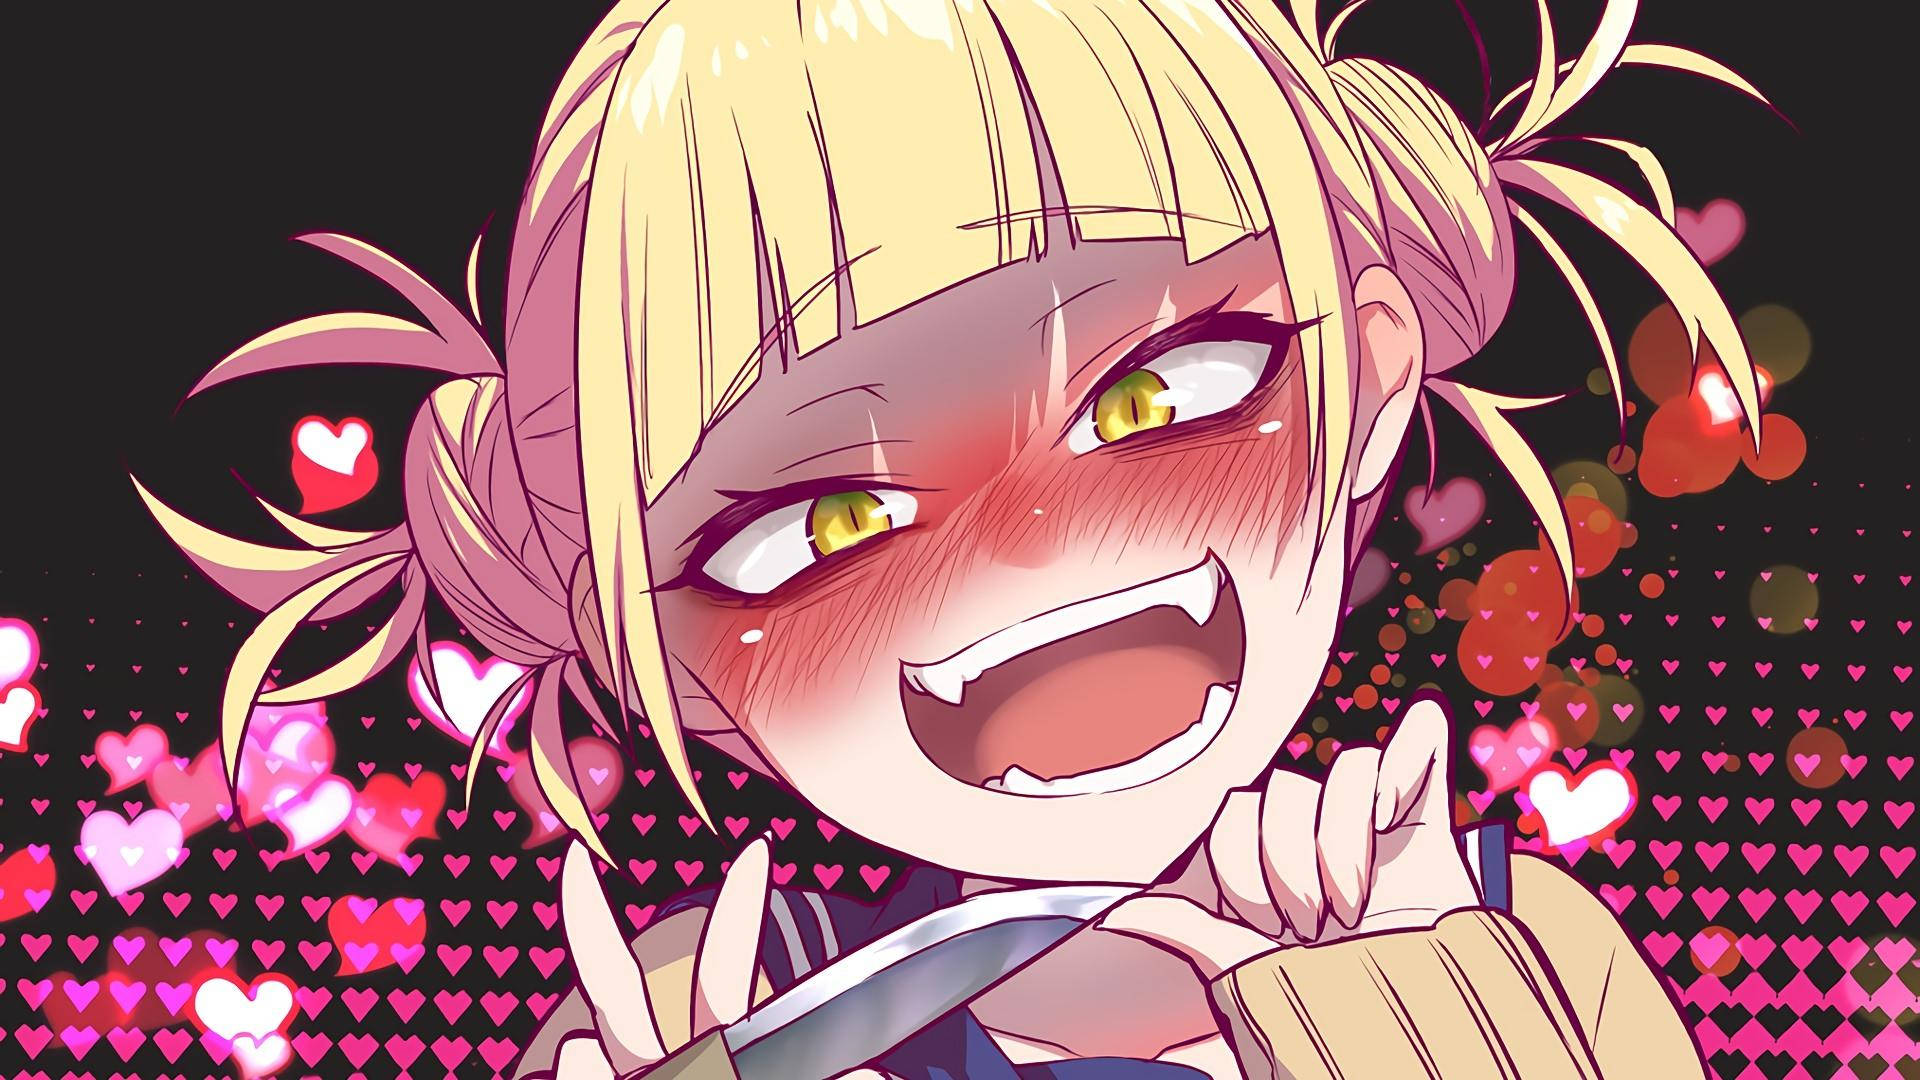 Himiko Toga With Hearts Wallpaper